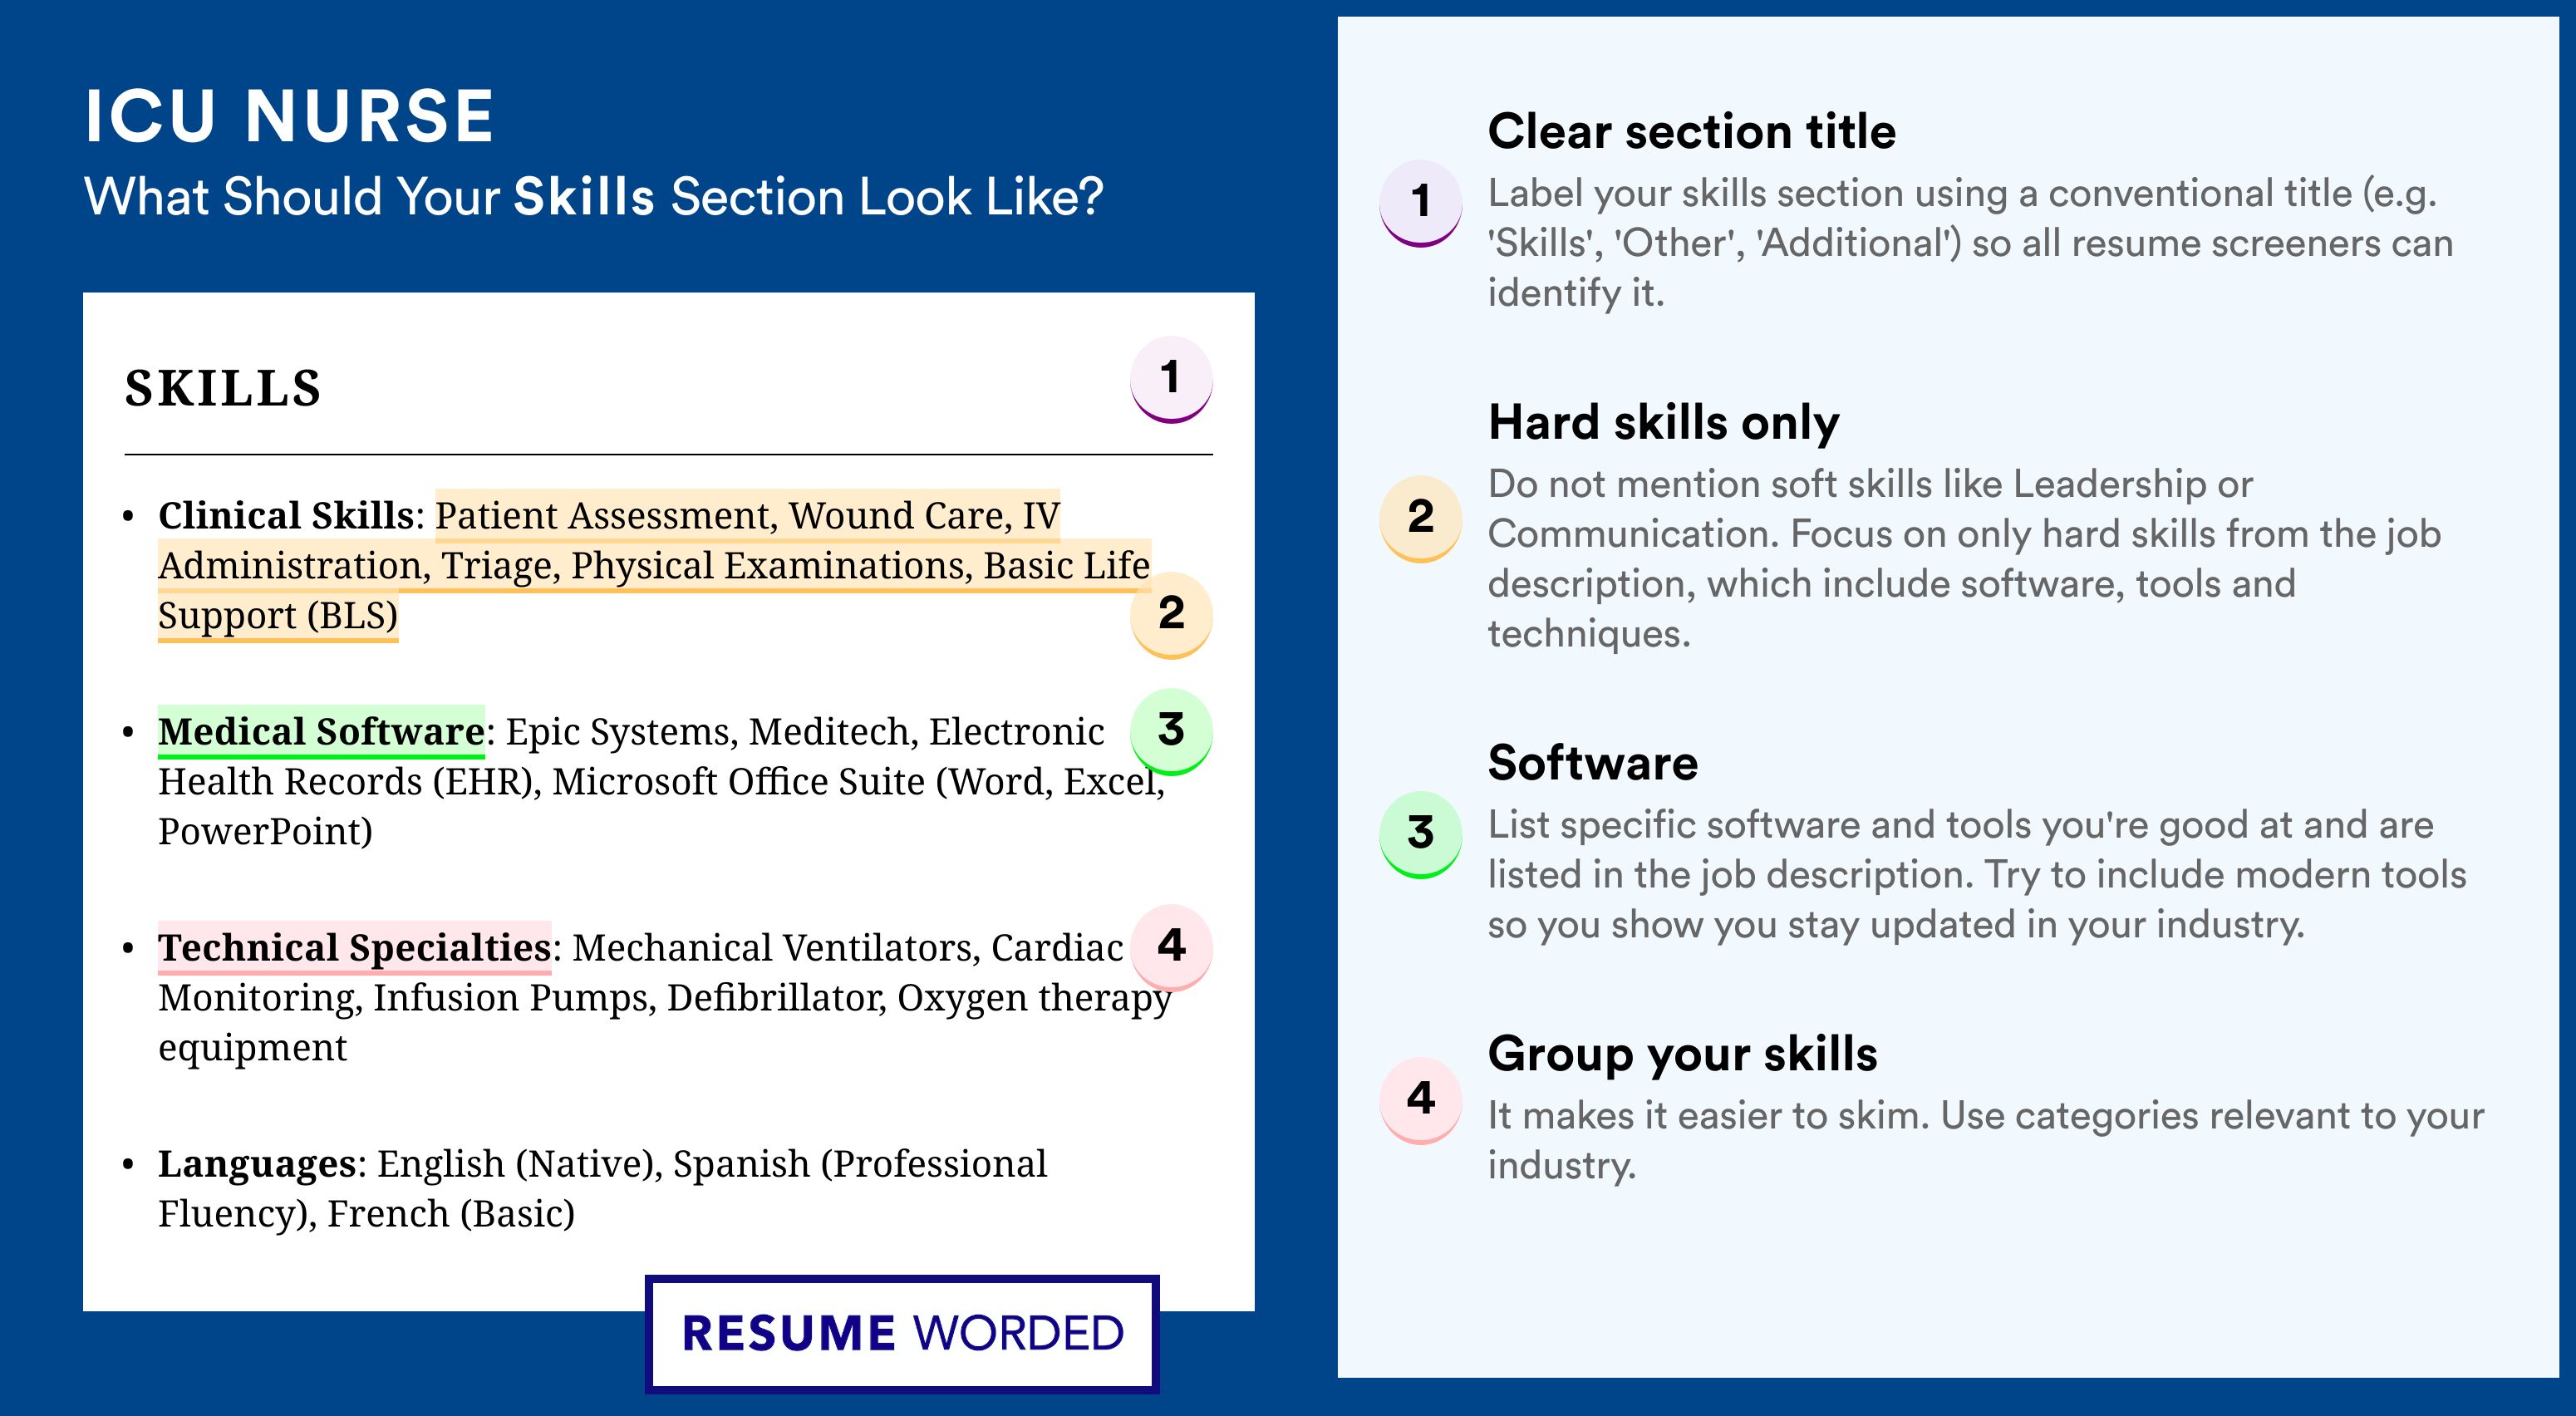 How To Write Your Skills Section - ICU Nurse Roles